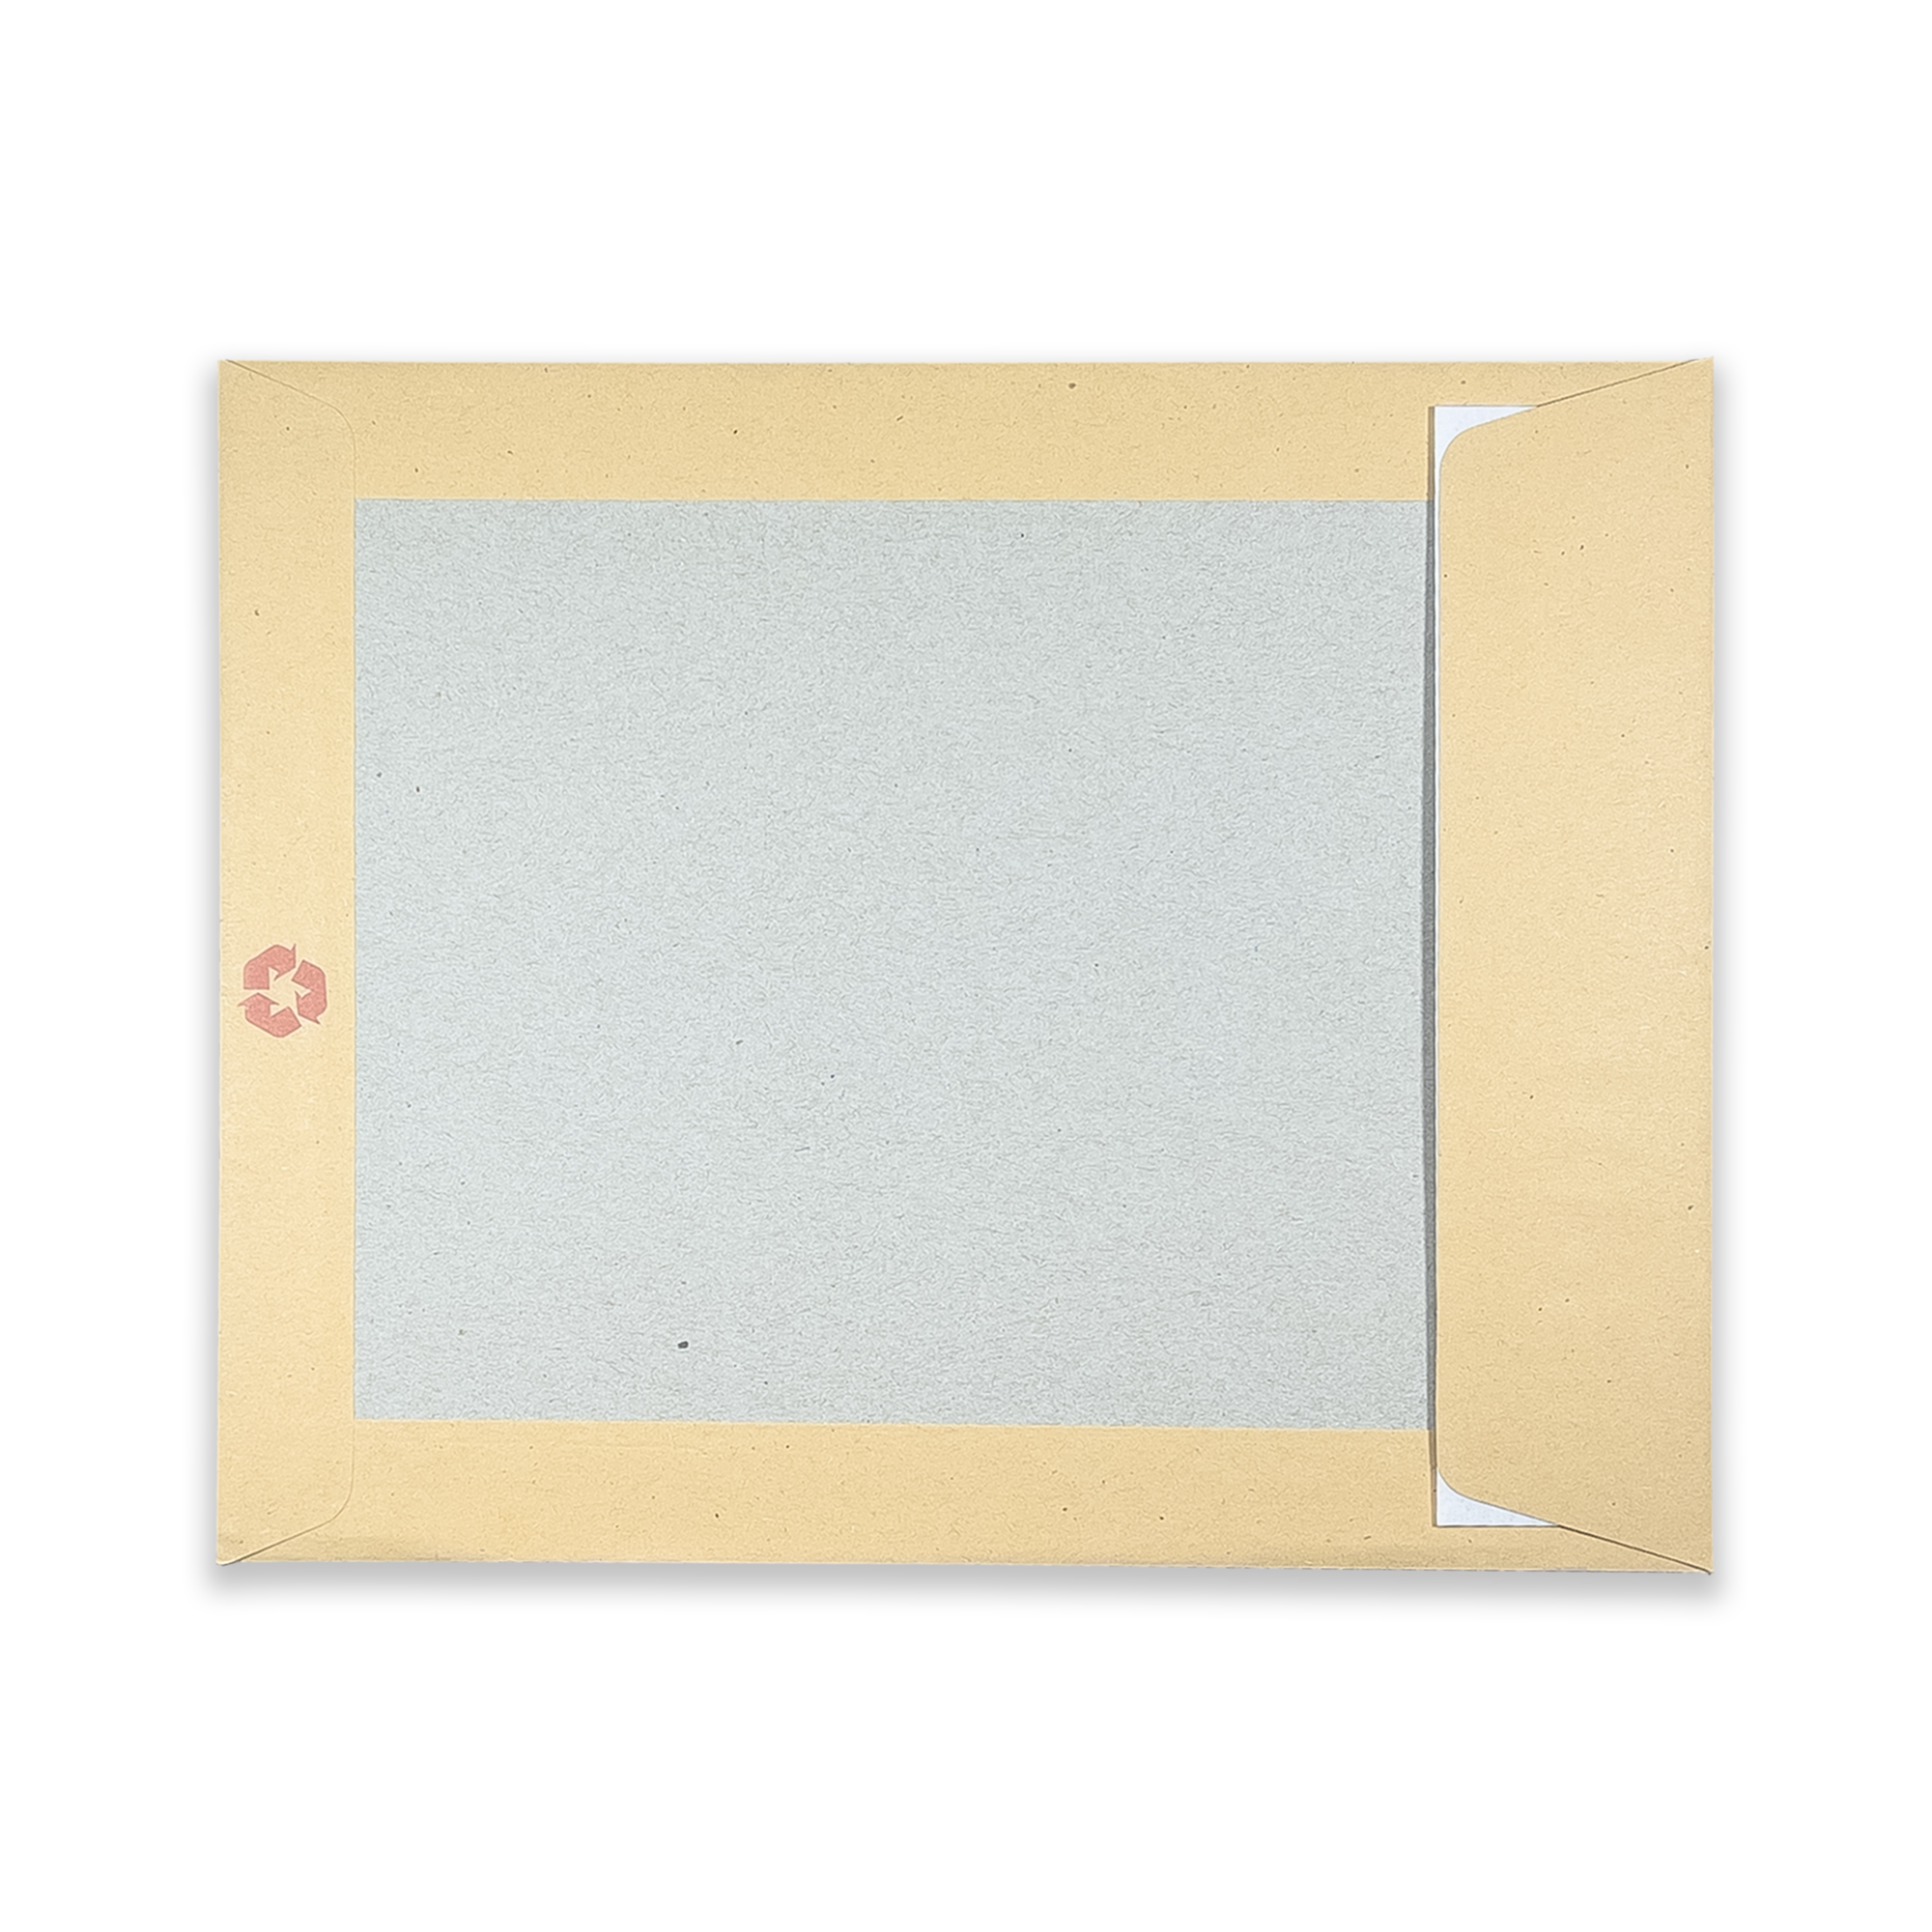 rectangle-manilla-please-do-not-bend-board-back-envelopes-back-flap-closed